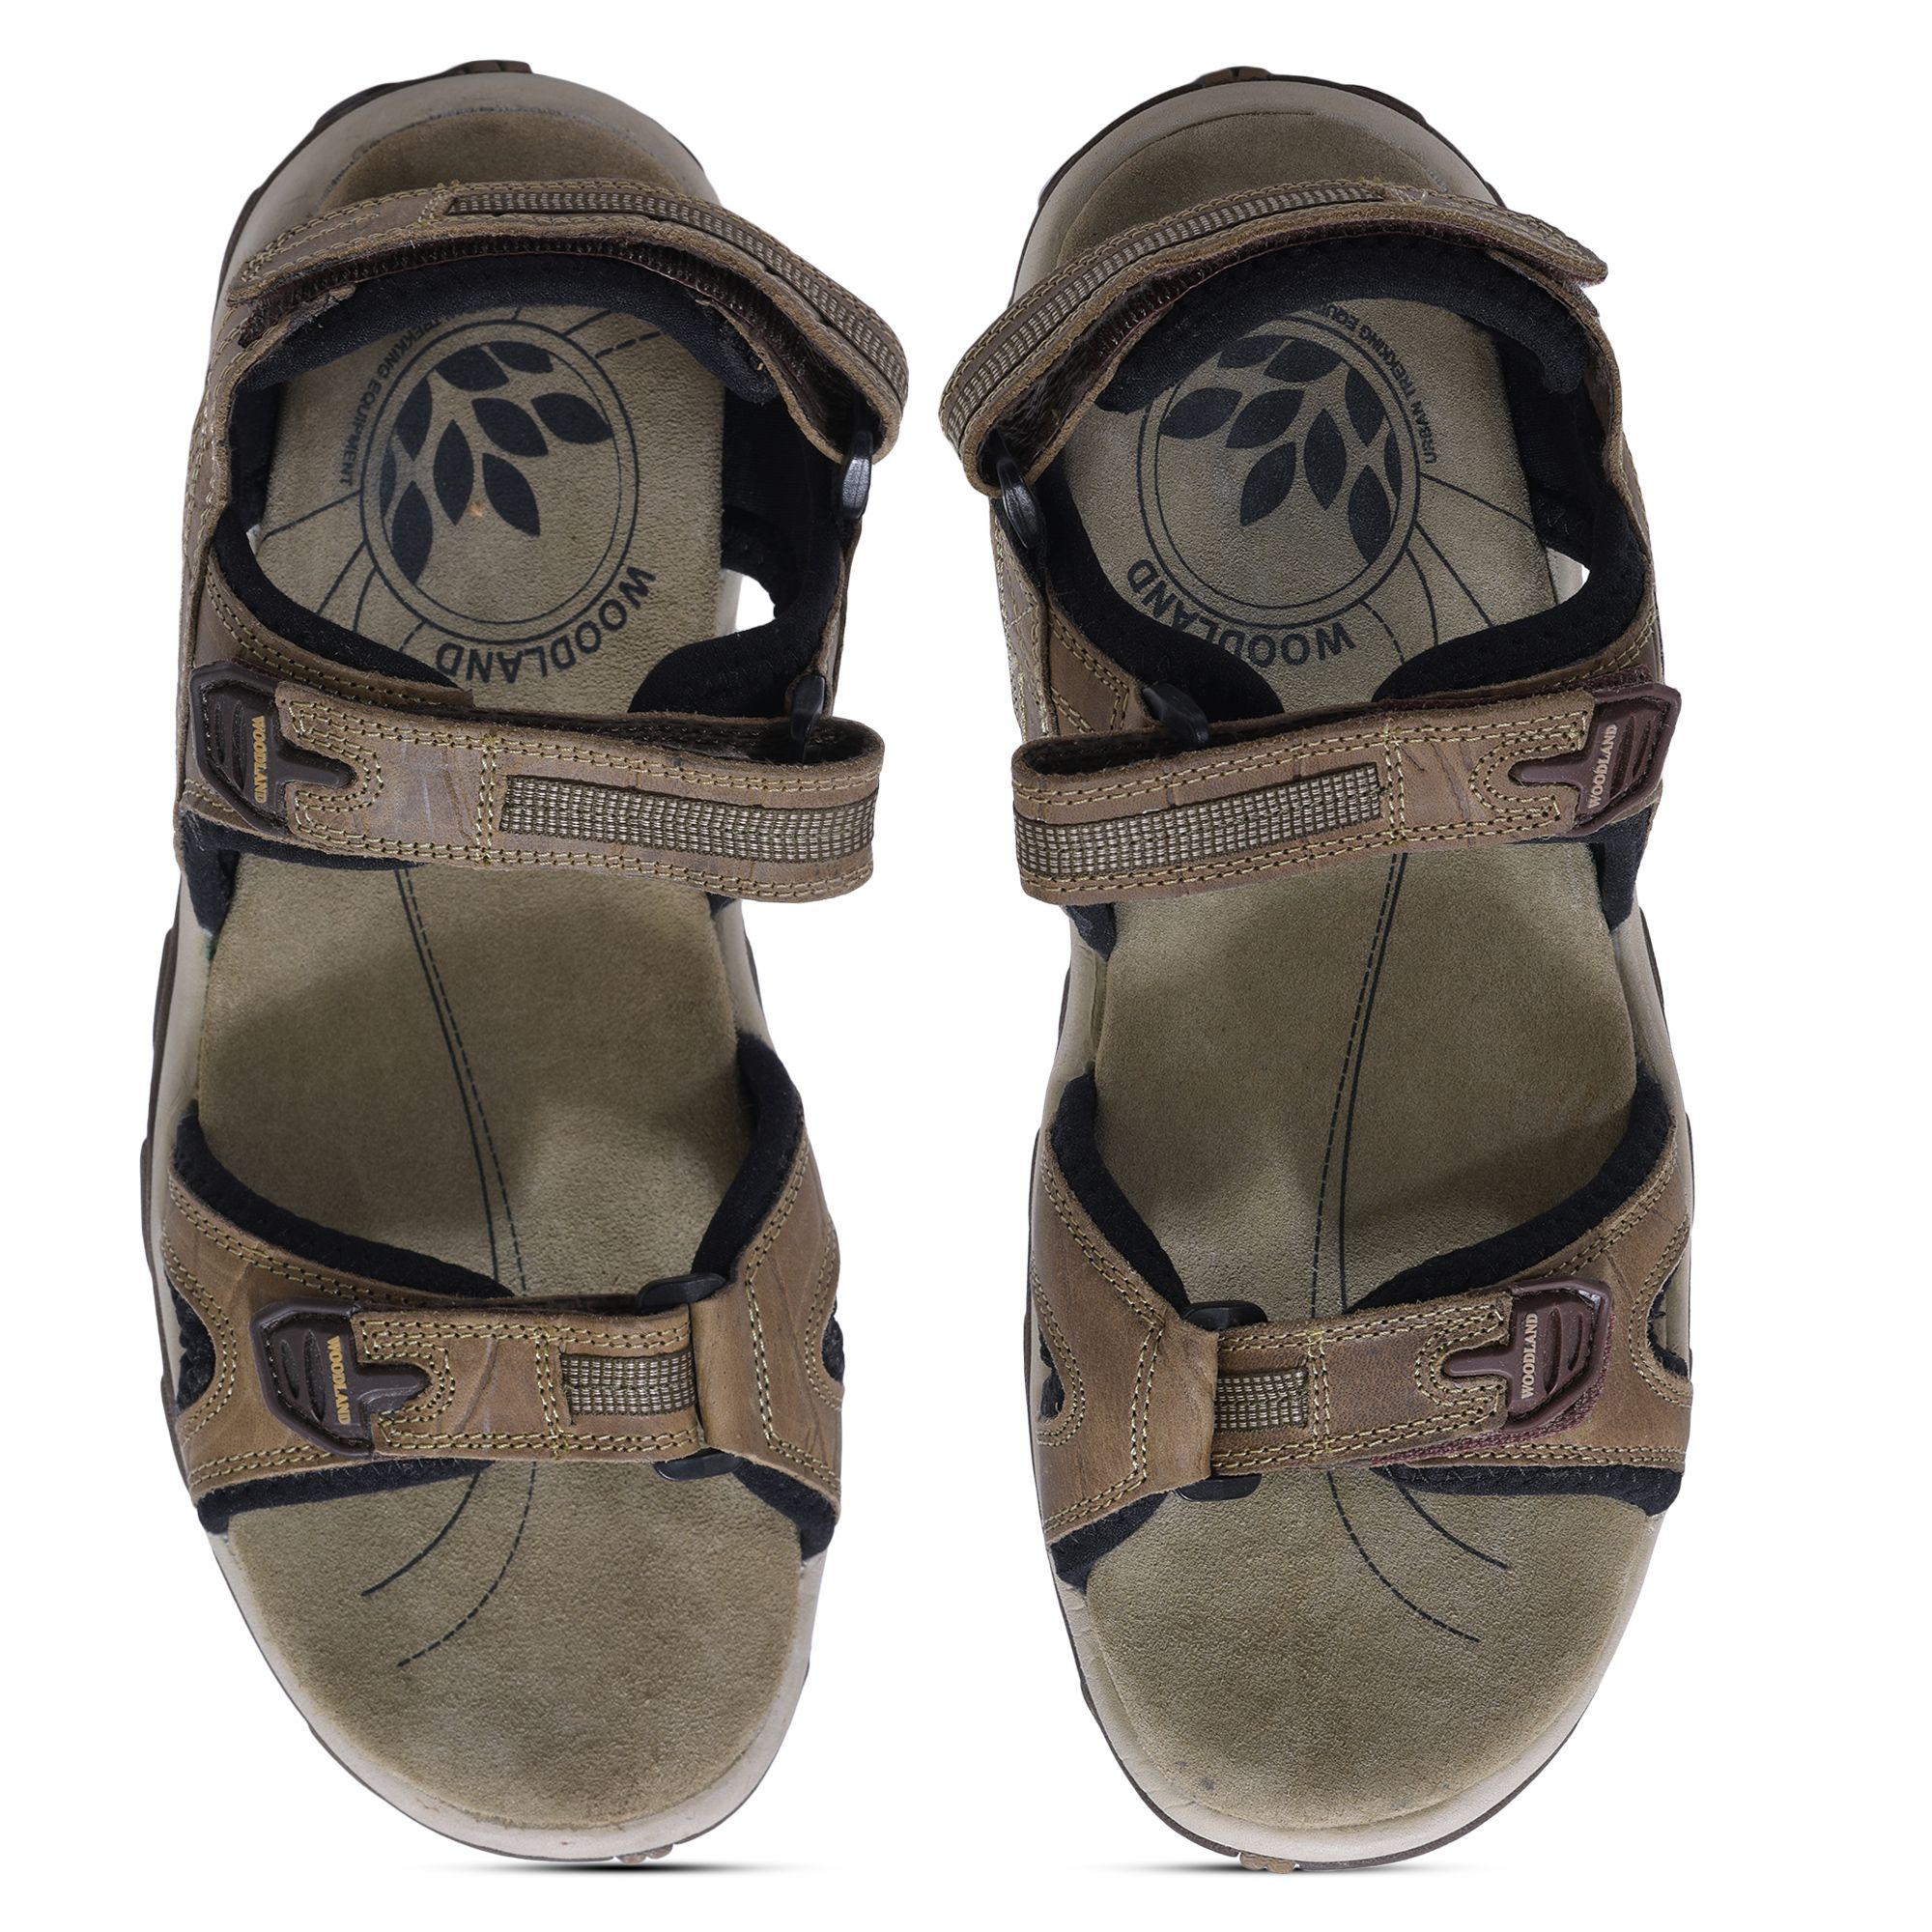 Woodland Men's Sandals, Mens Leather Sandals Waterproof Quick Dry Closed  Toe Protection Beach Summer, Brown Yellow : Amazon.com.be: Fashion